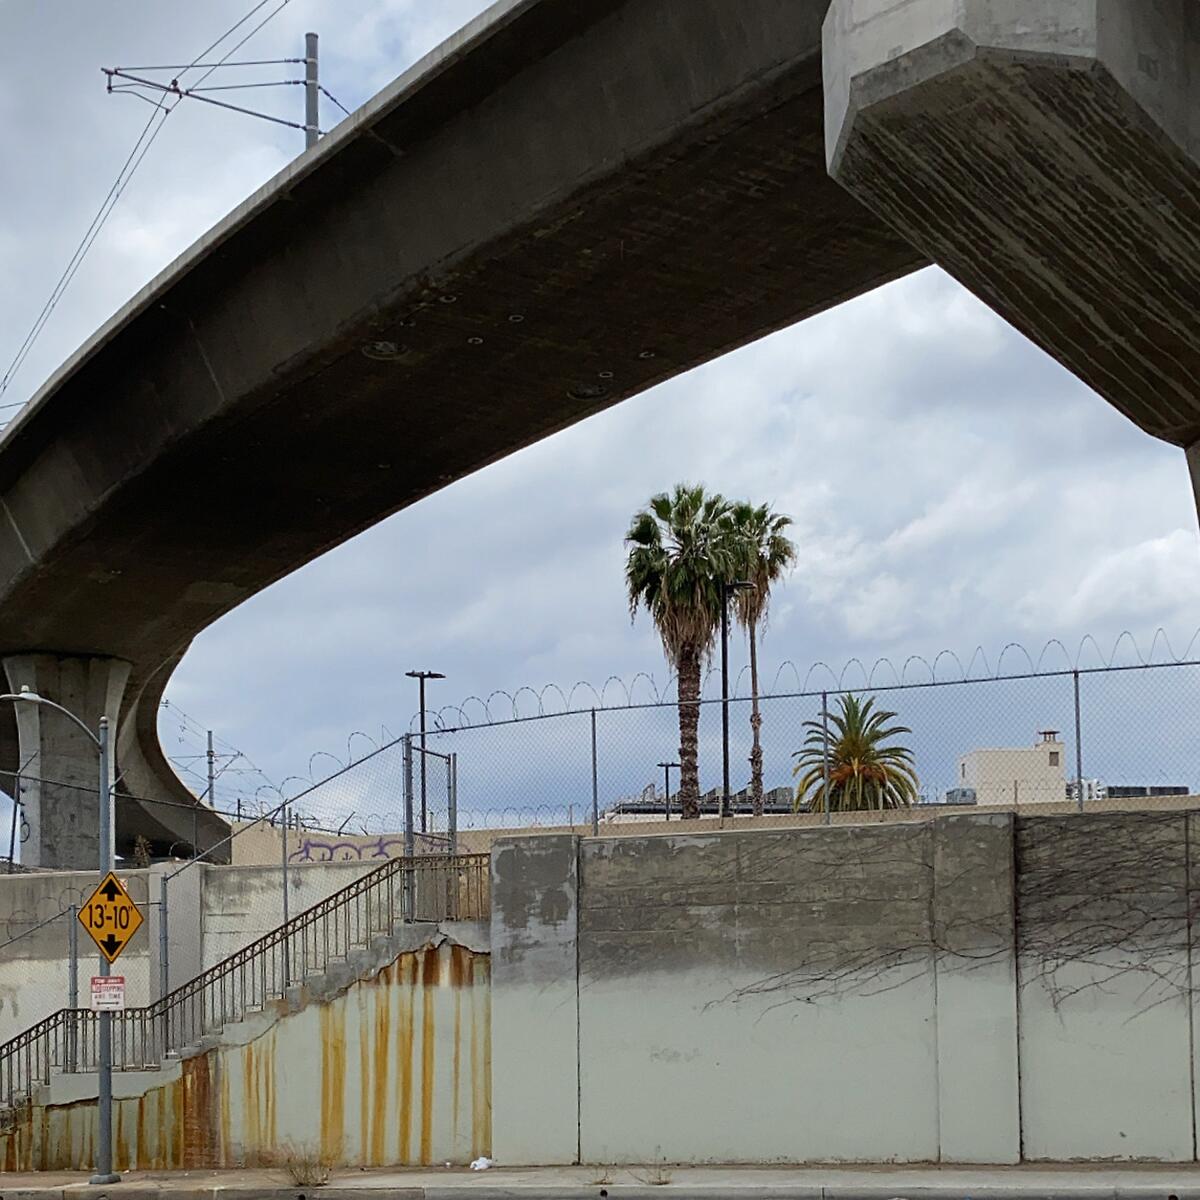 Palm trees rise above a concrete wall trimmed in barbed wire as a stretch of elevated roadway runs overhead